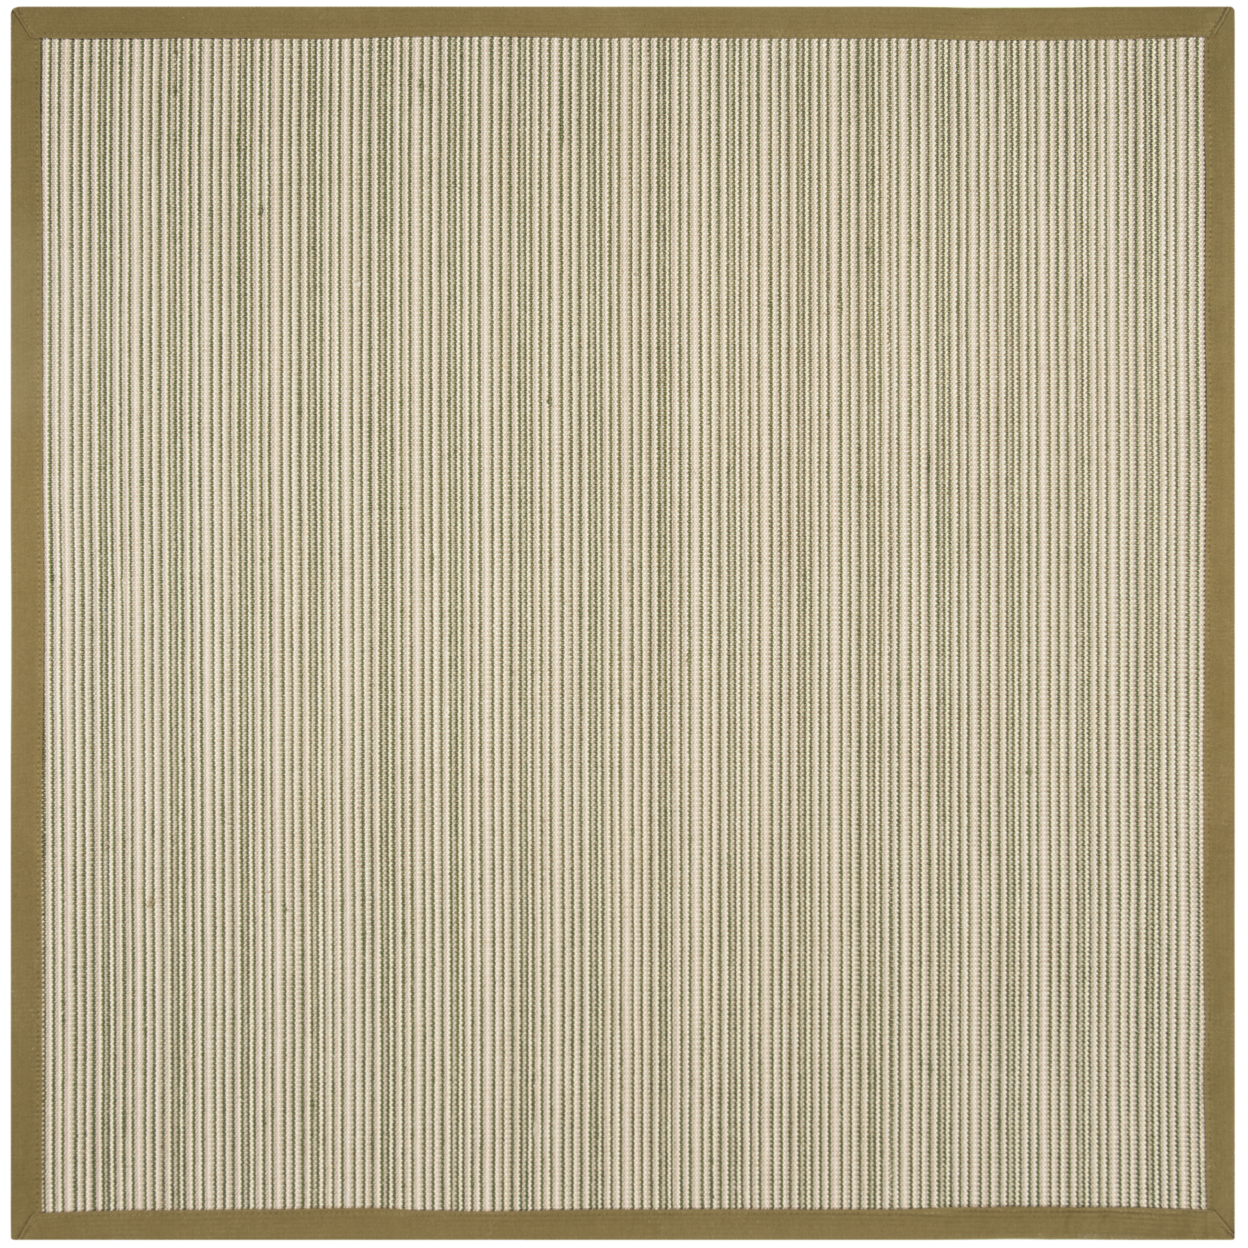 SAFAVIEH Natural Fiber Collection NF132A Multi/Green Rug - 6' Square